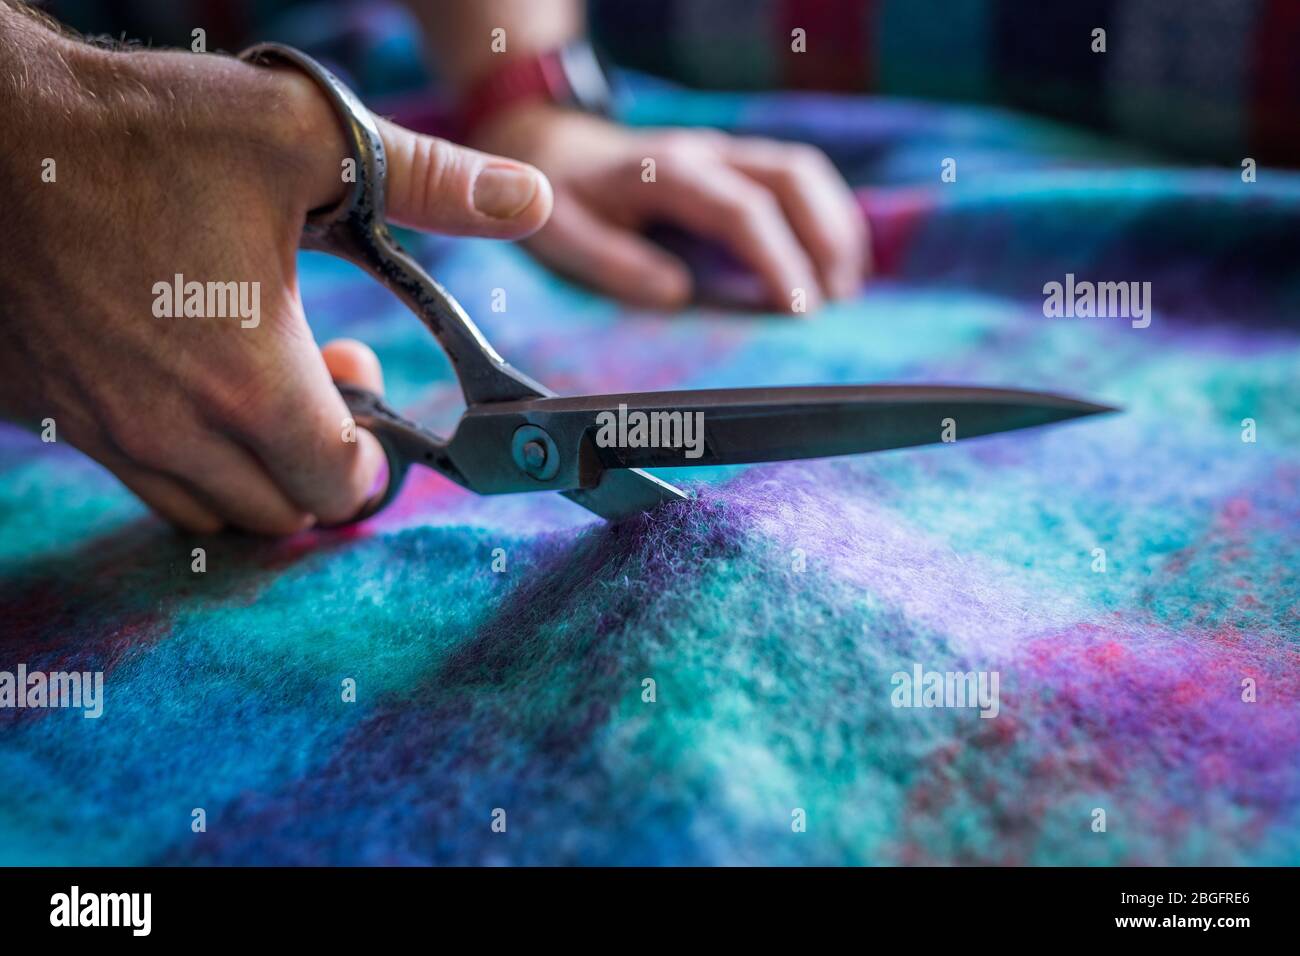 Cutting fabric in a textile factory. Stock Photo